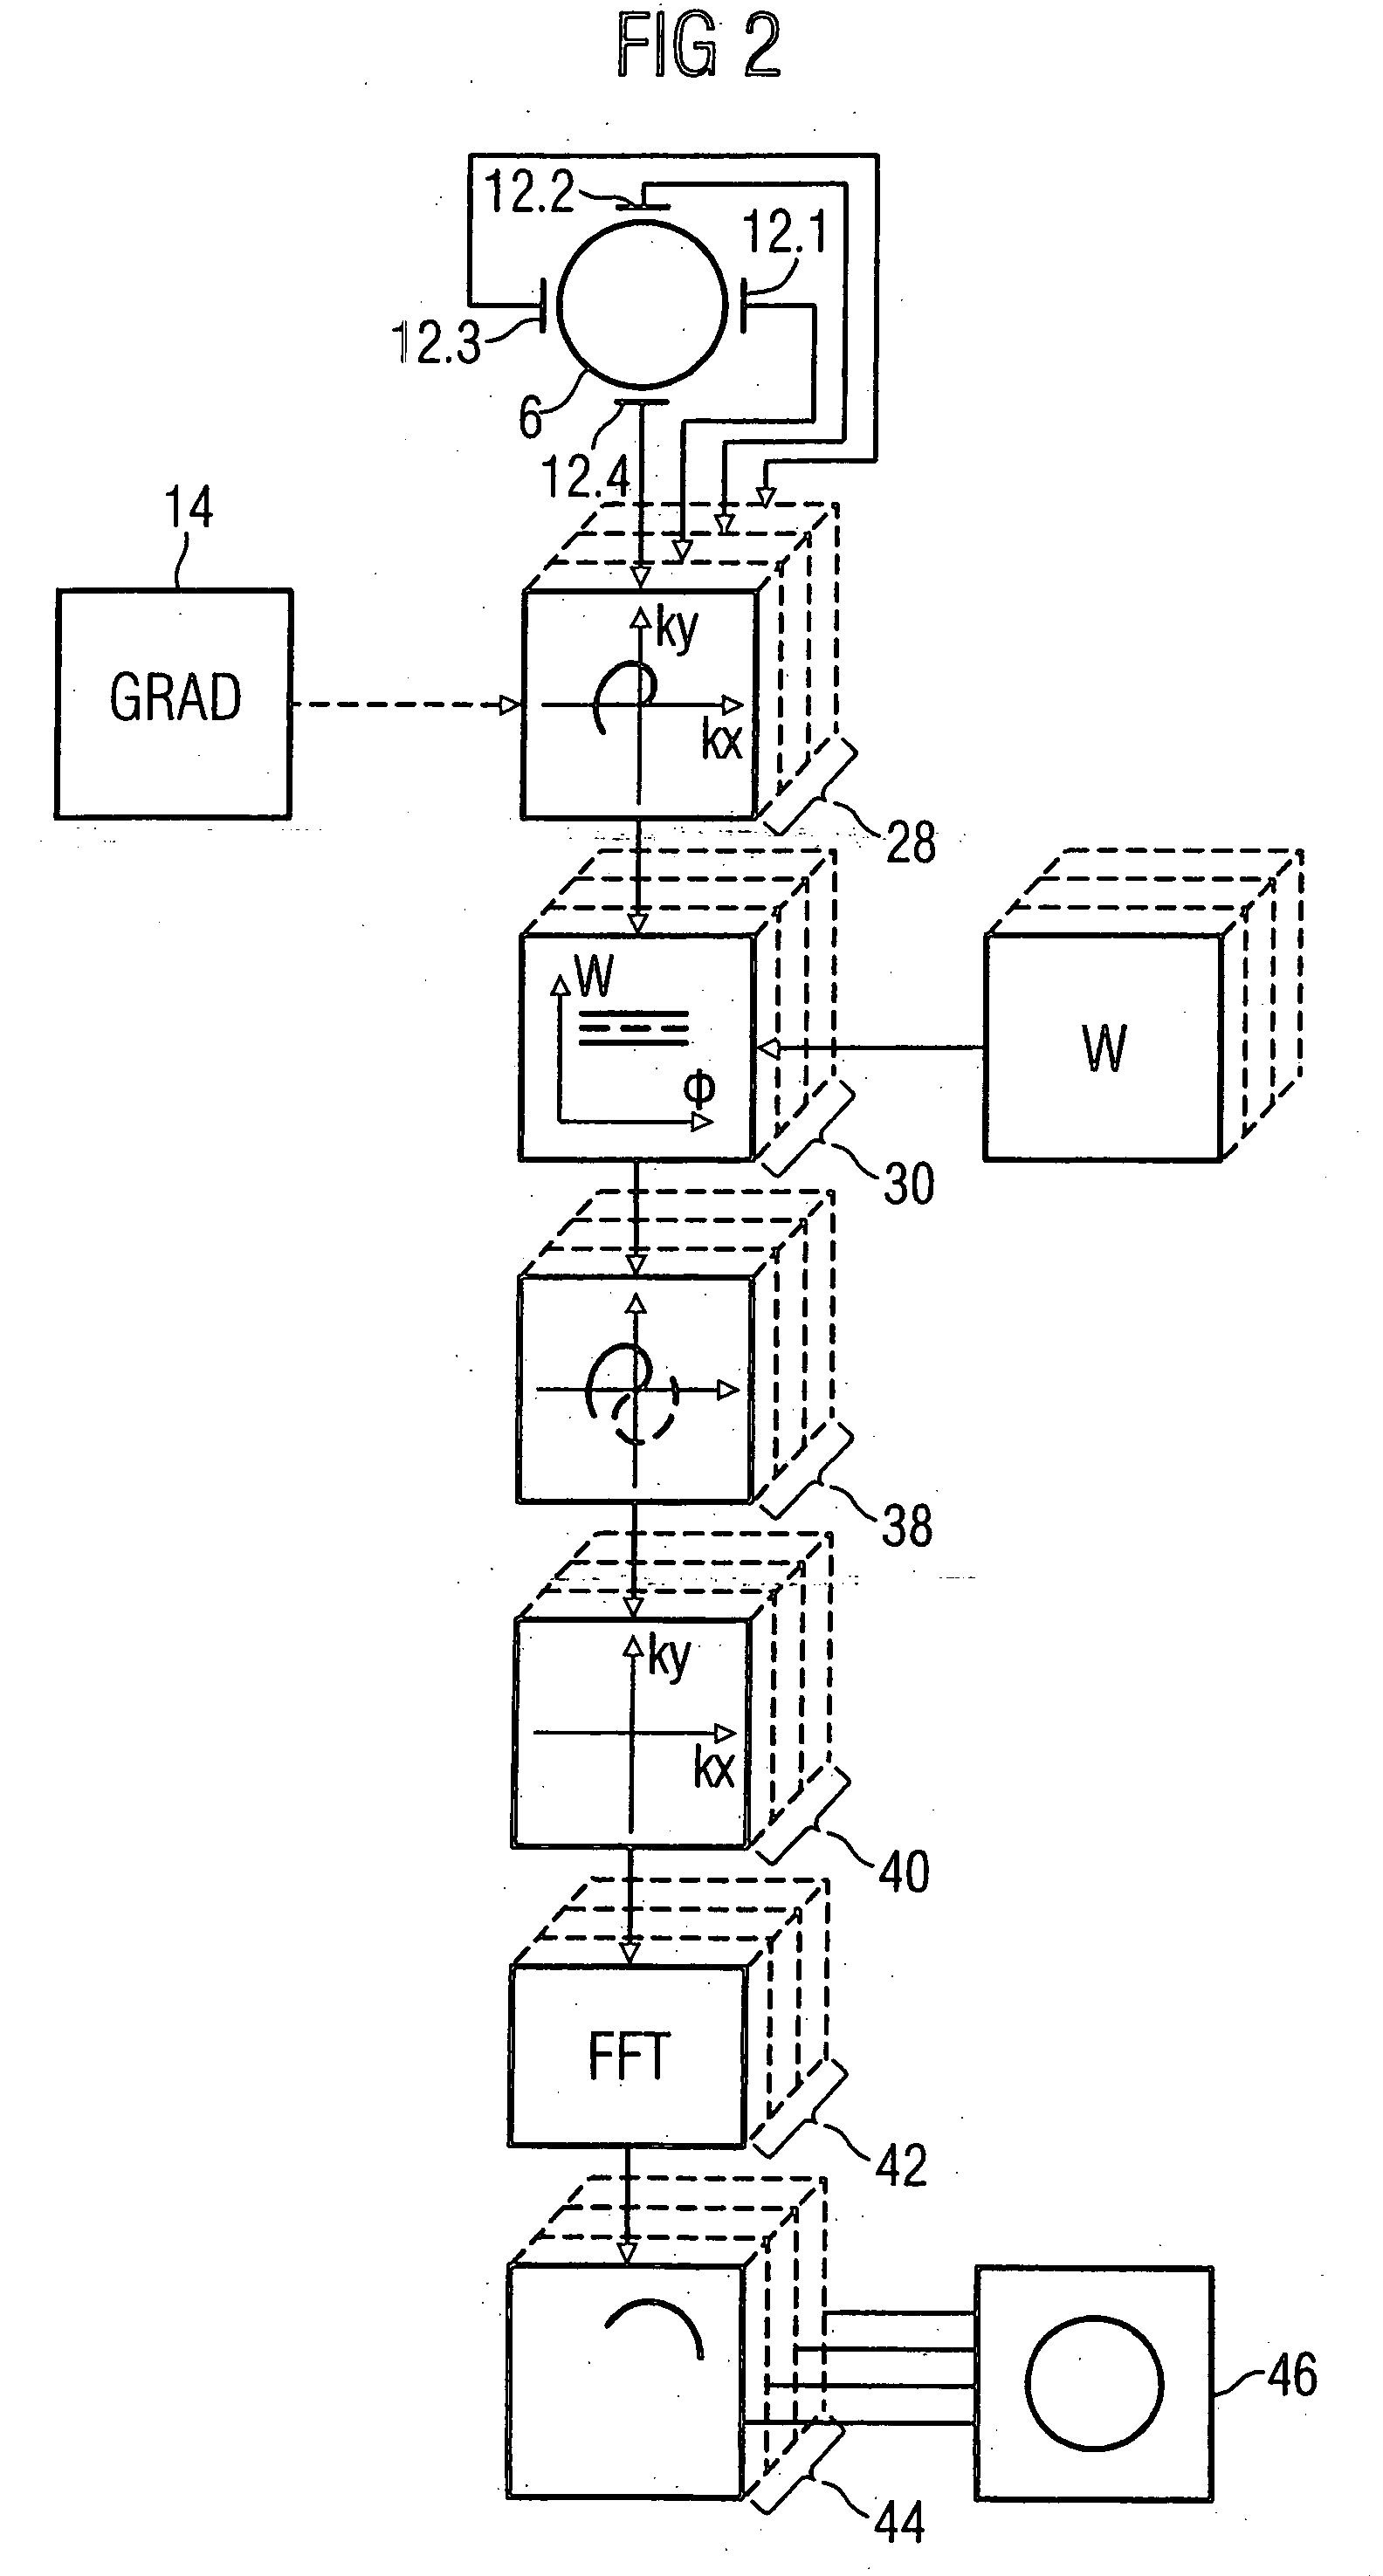 Magnetic resonance imaging method using a partial parallel acquisition technique with non-cartesian occupation of k-space